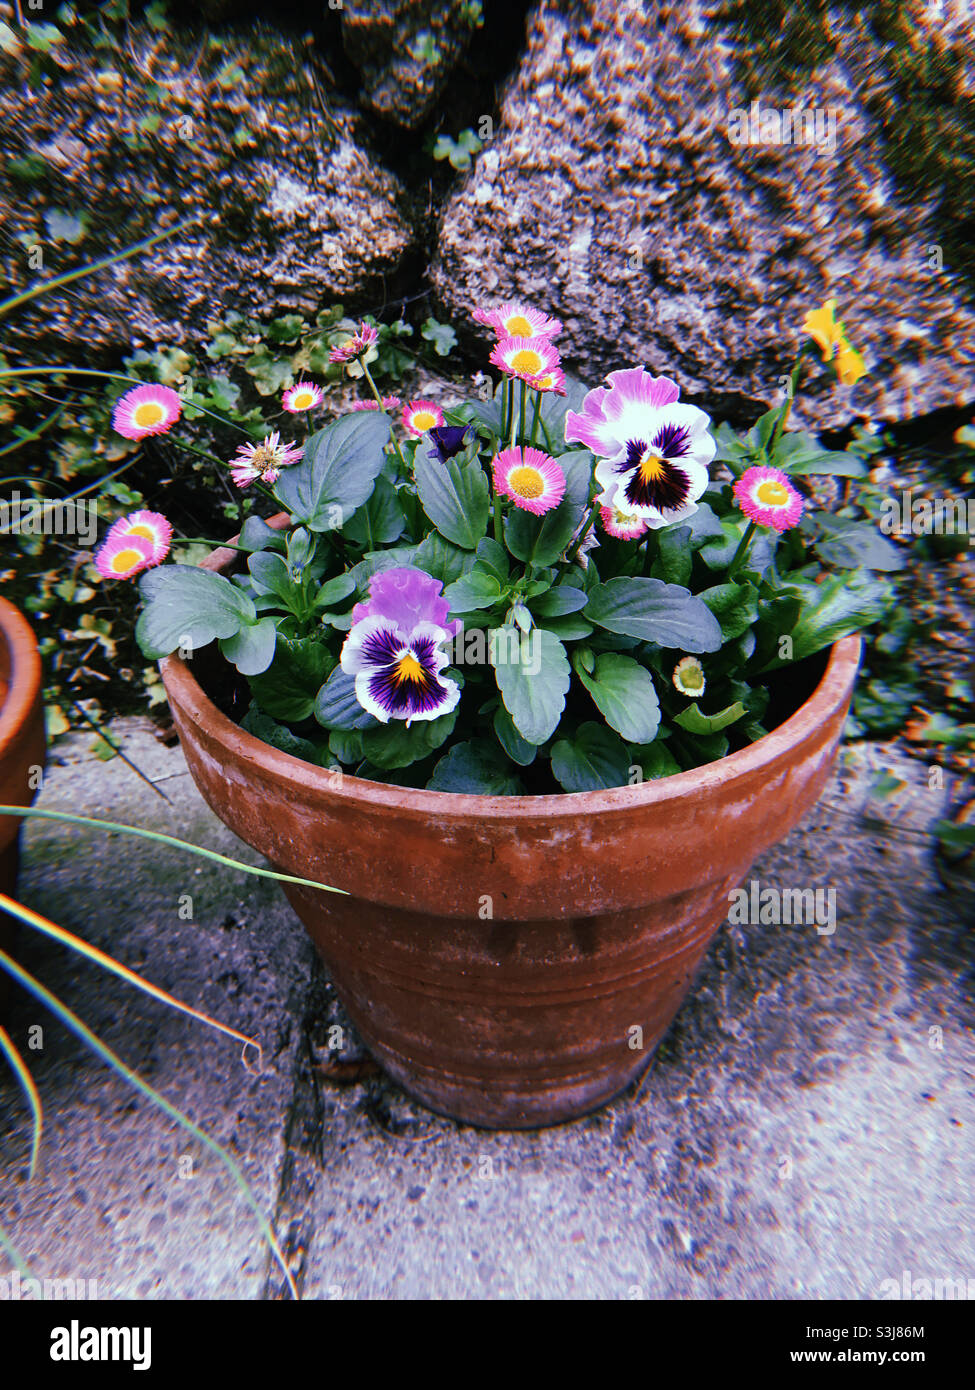 Pansies and asters in terracotta pot Stock Photo